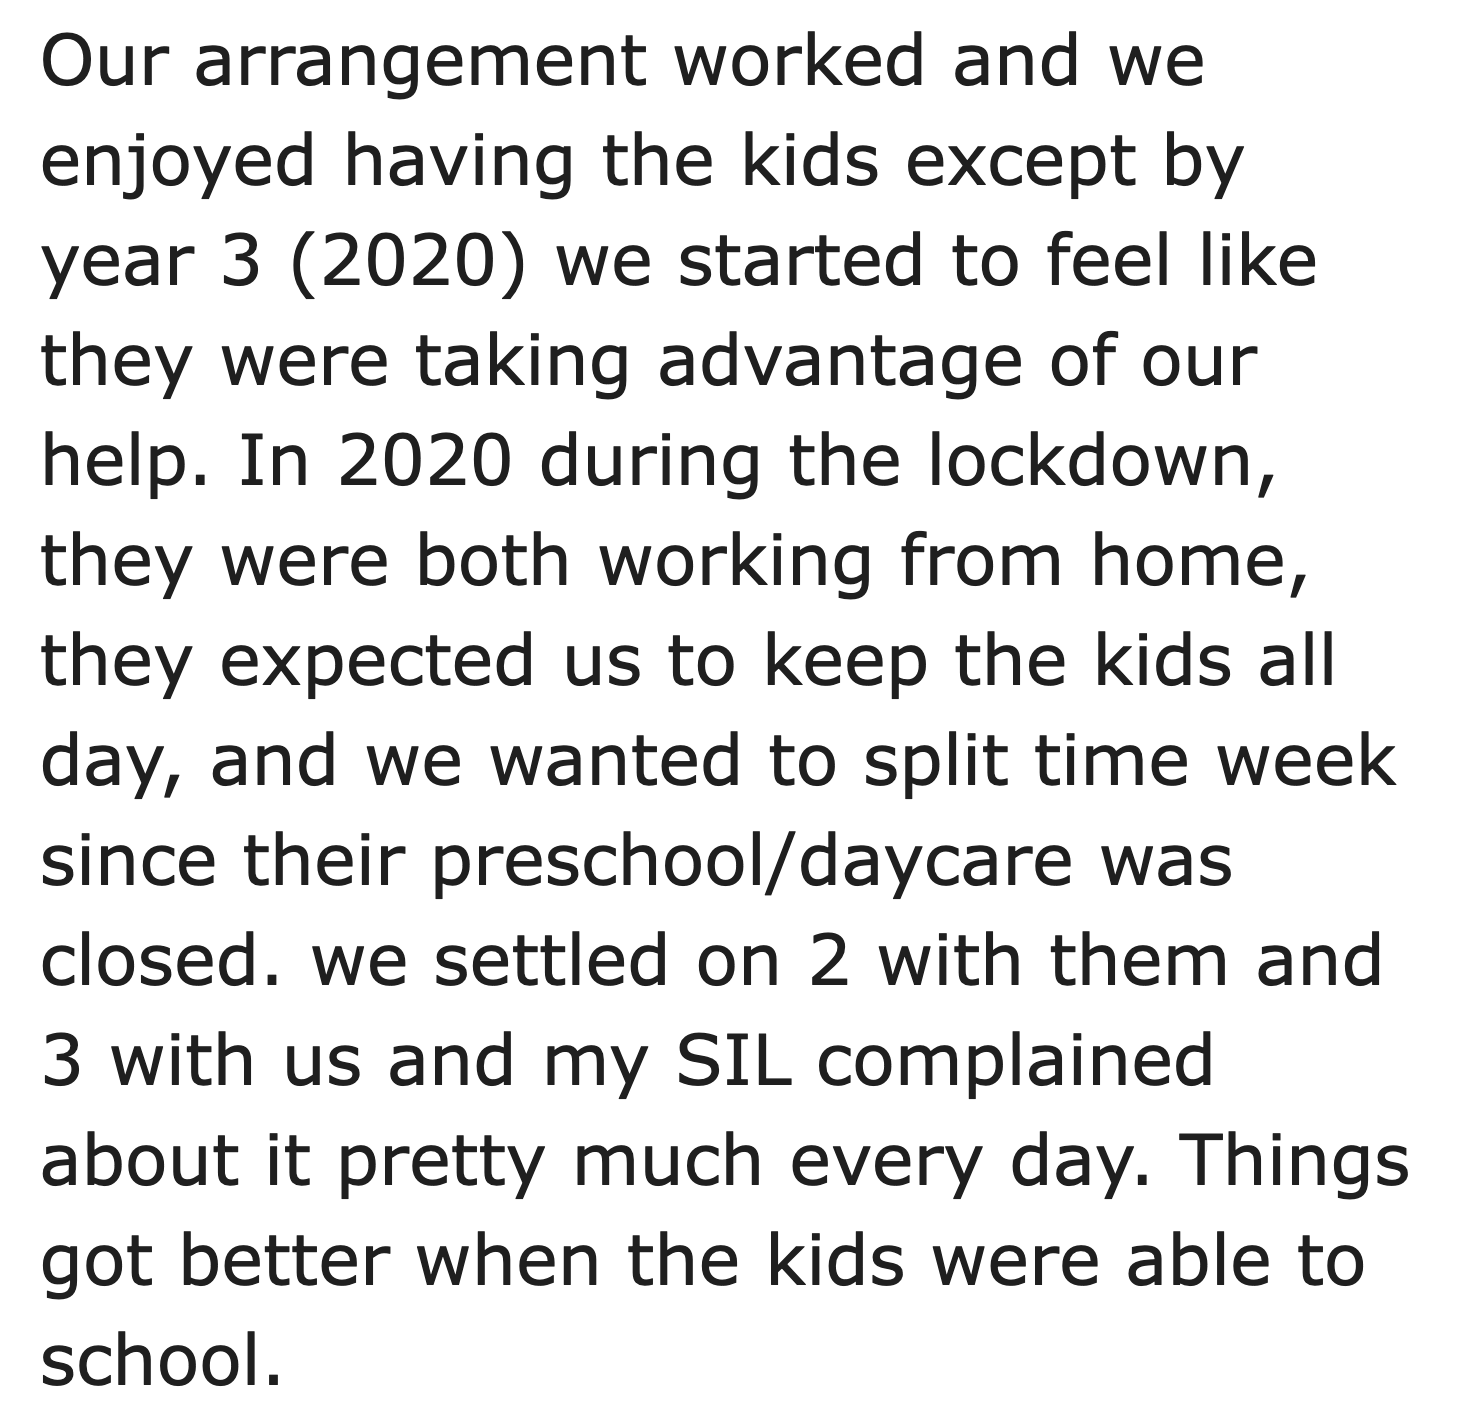 AITA not wanting to raise children's children - quotes - Our arrangement worked and we enjoyed having the kids except by year 3 2020 we started to feel they were taking advantage of our help. In 2020 during the lockdown, they were both working from home, 